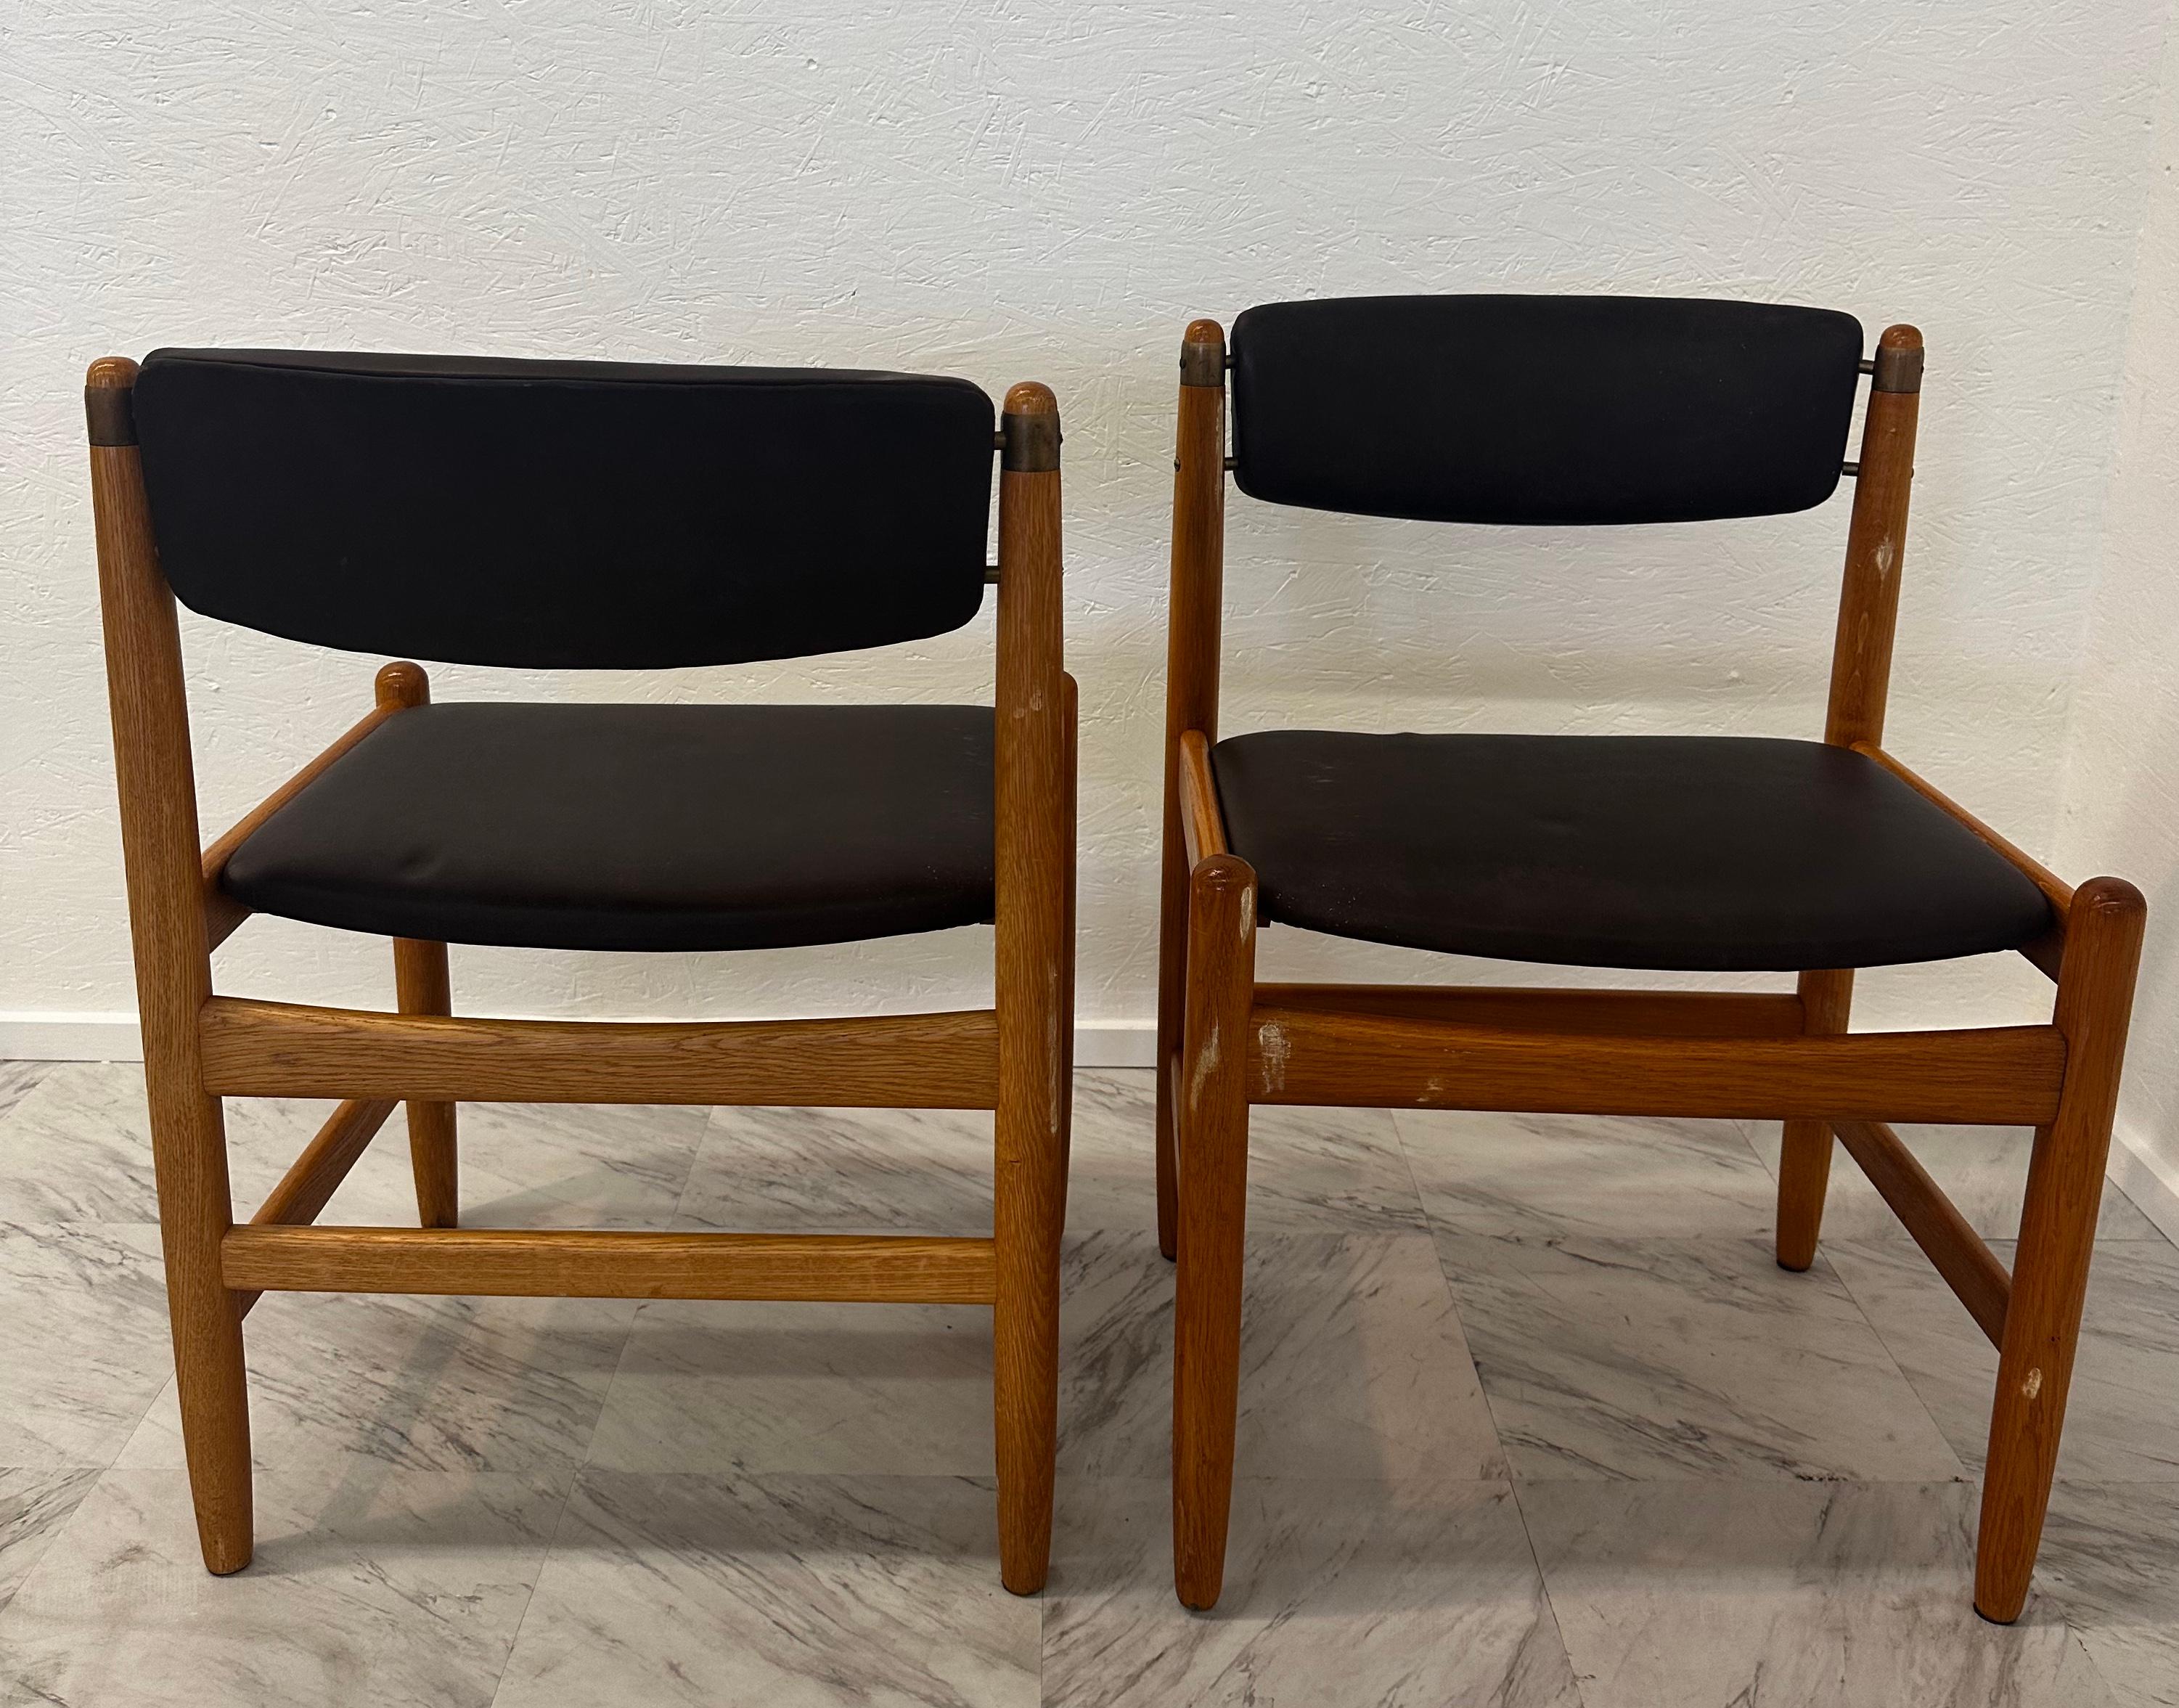 Brass Set of 6 Oak Dining Chairs by Børge Mogensen for Karl Andersson & Söner, 1950s For Sale